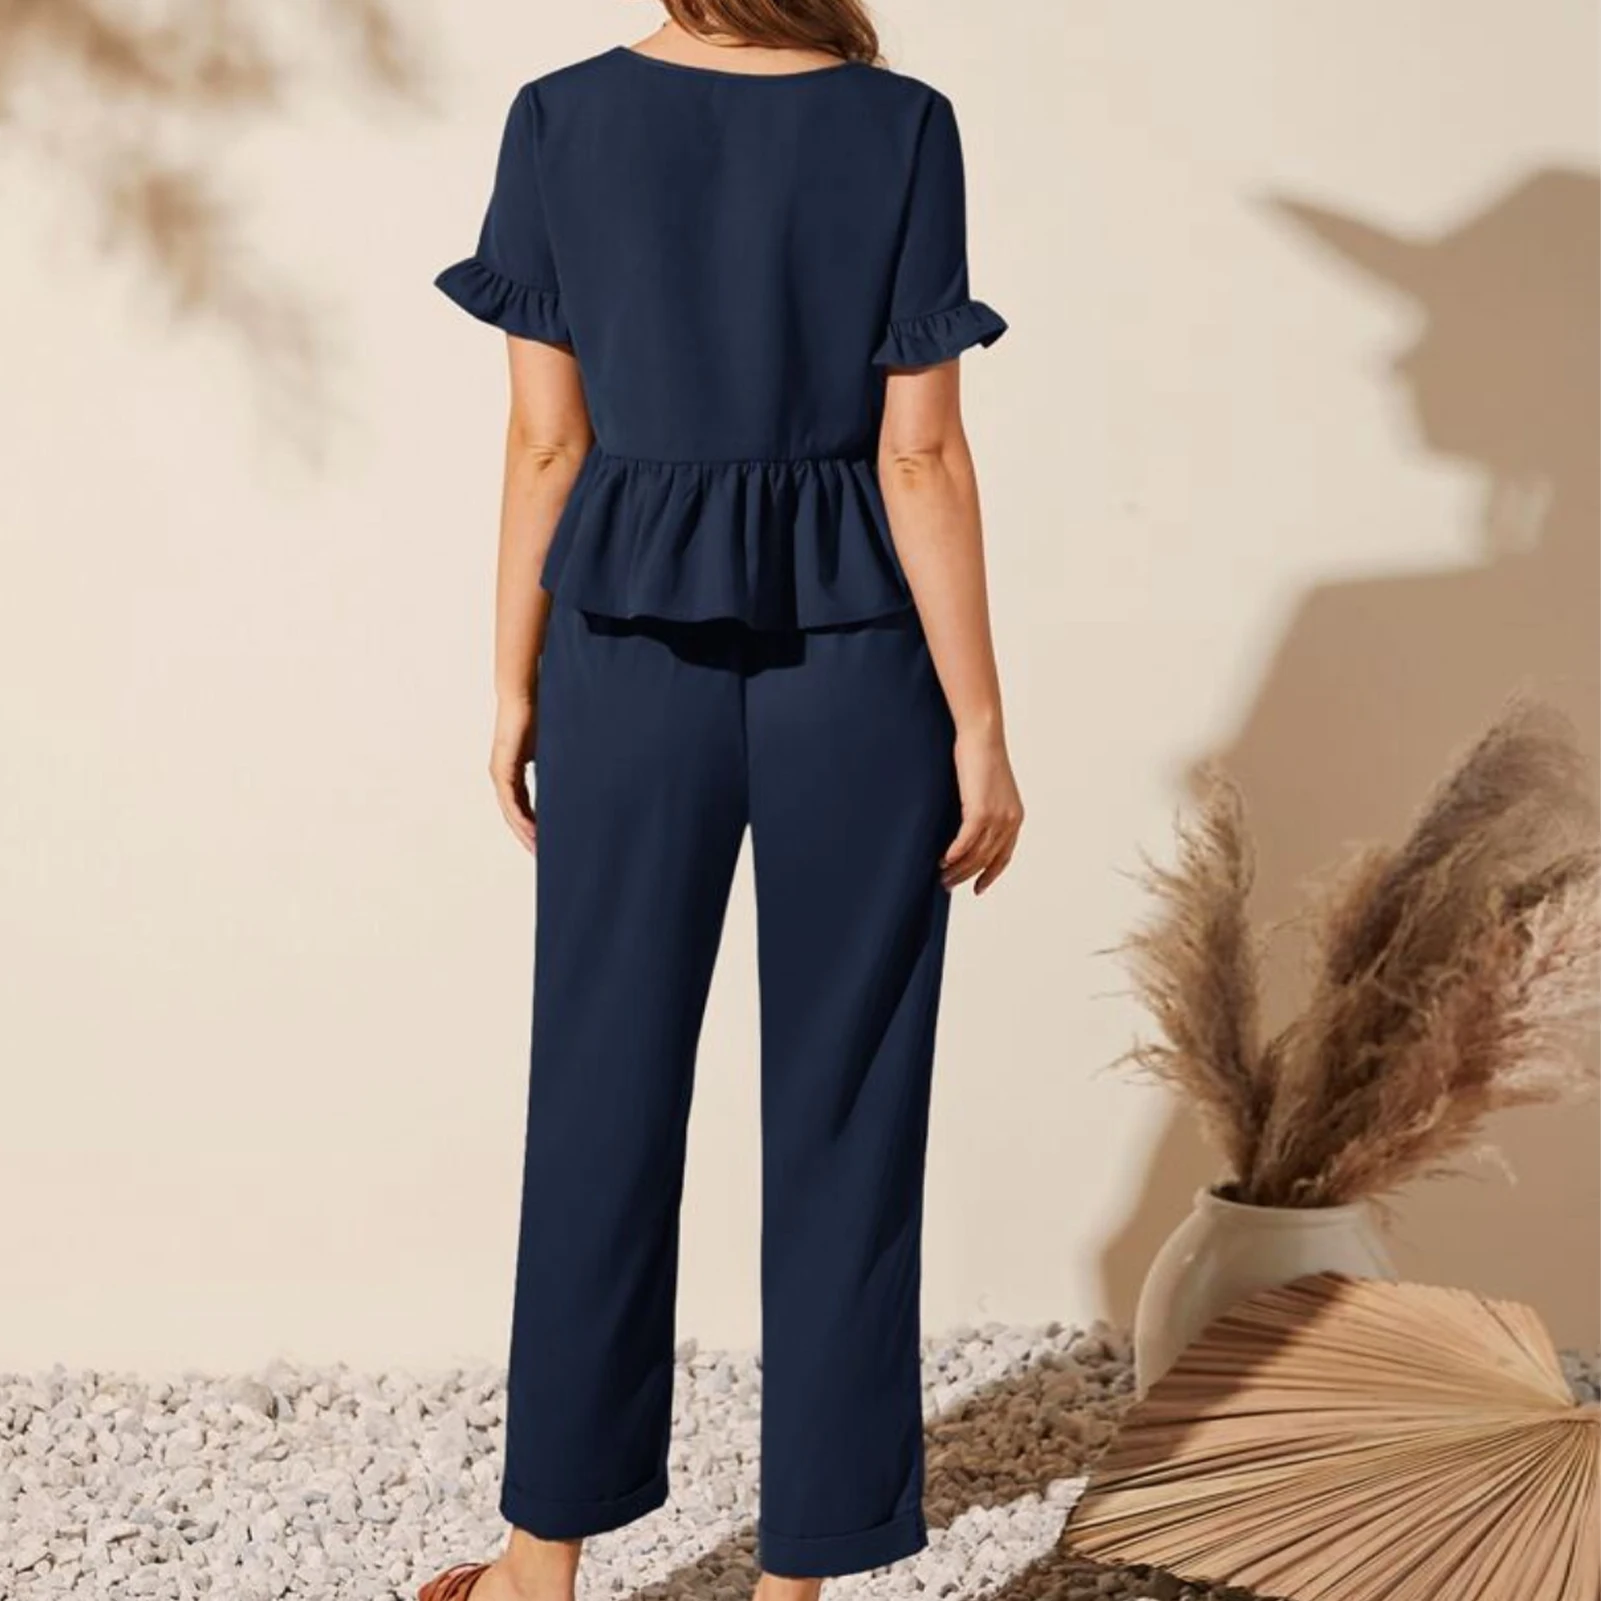 

Ladies Short Sleeve Top Pants V Neck Women 2 Piece Straight Pants Set Flounce Sleeve with Pockets Solid Color Vacation Outfit